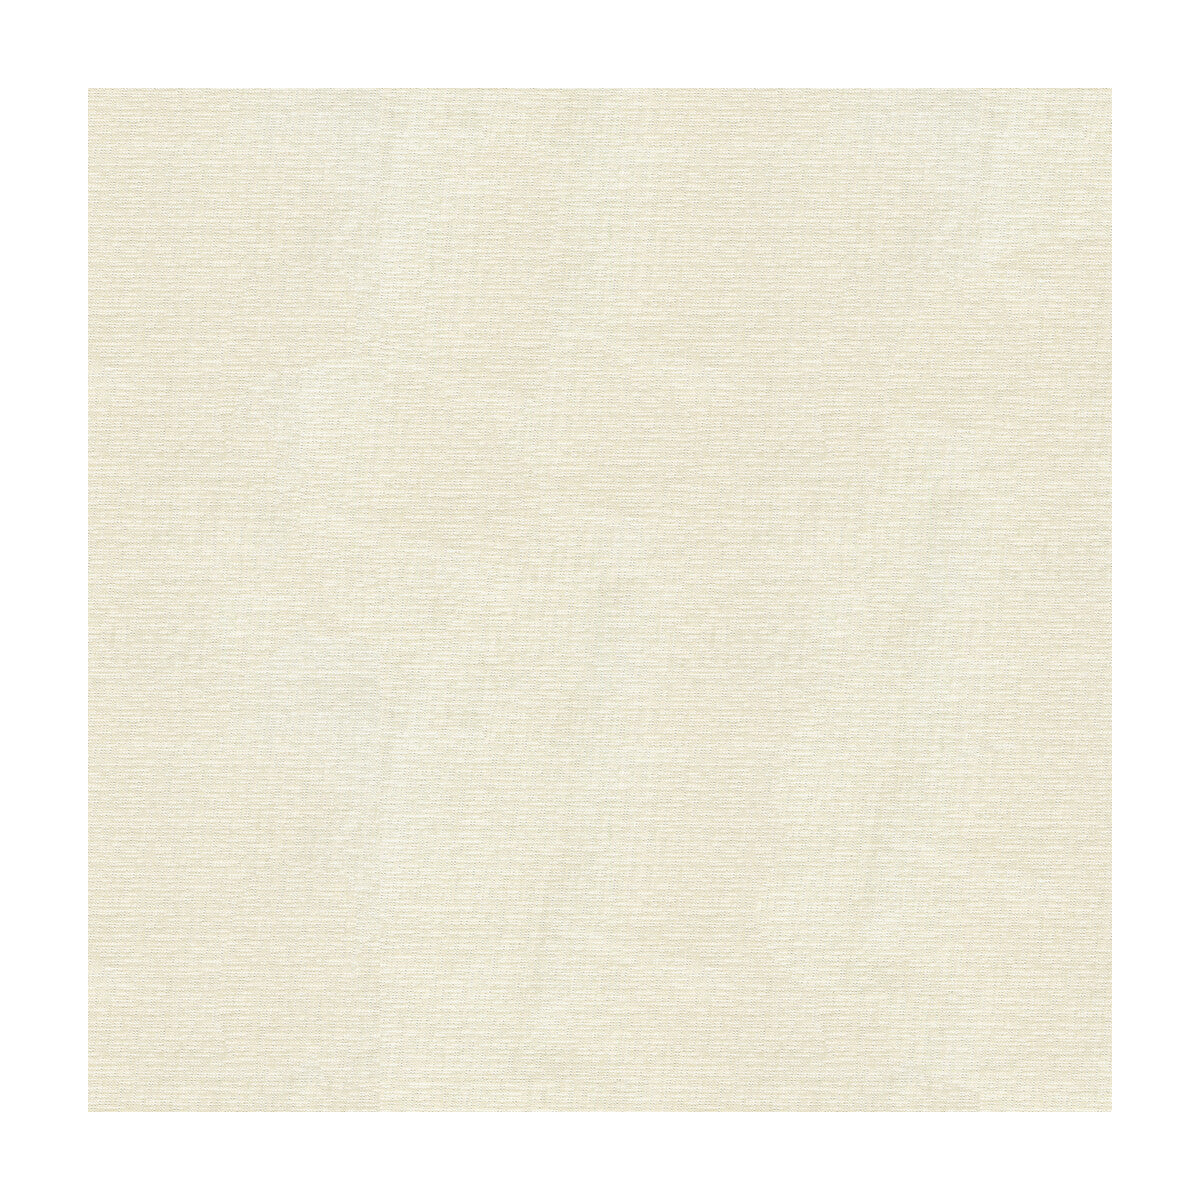 Kravet Contract fabric in 4156-101 color - pattern 4156.101.0 - by Kravet Contract